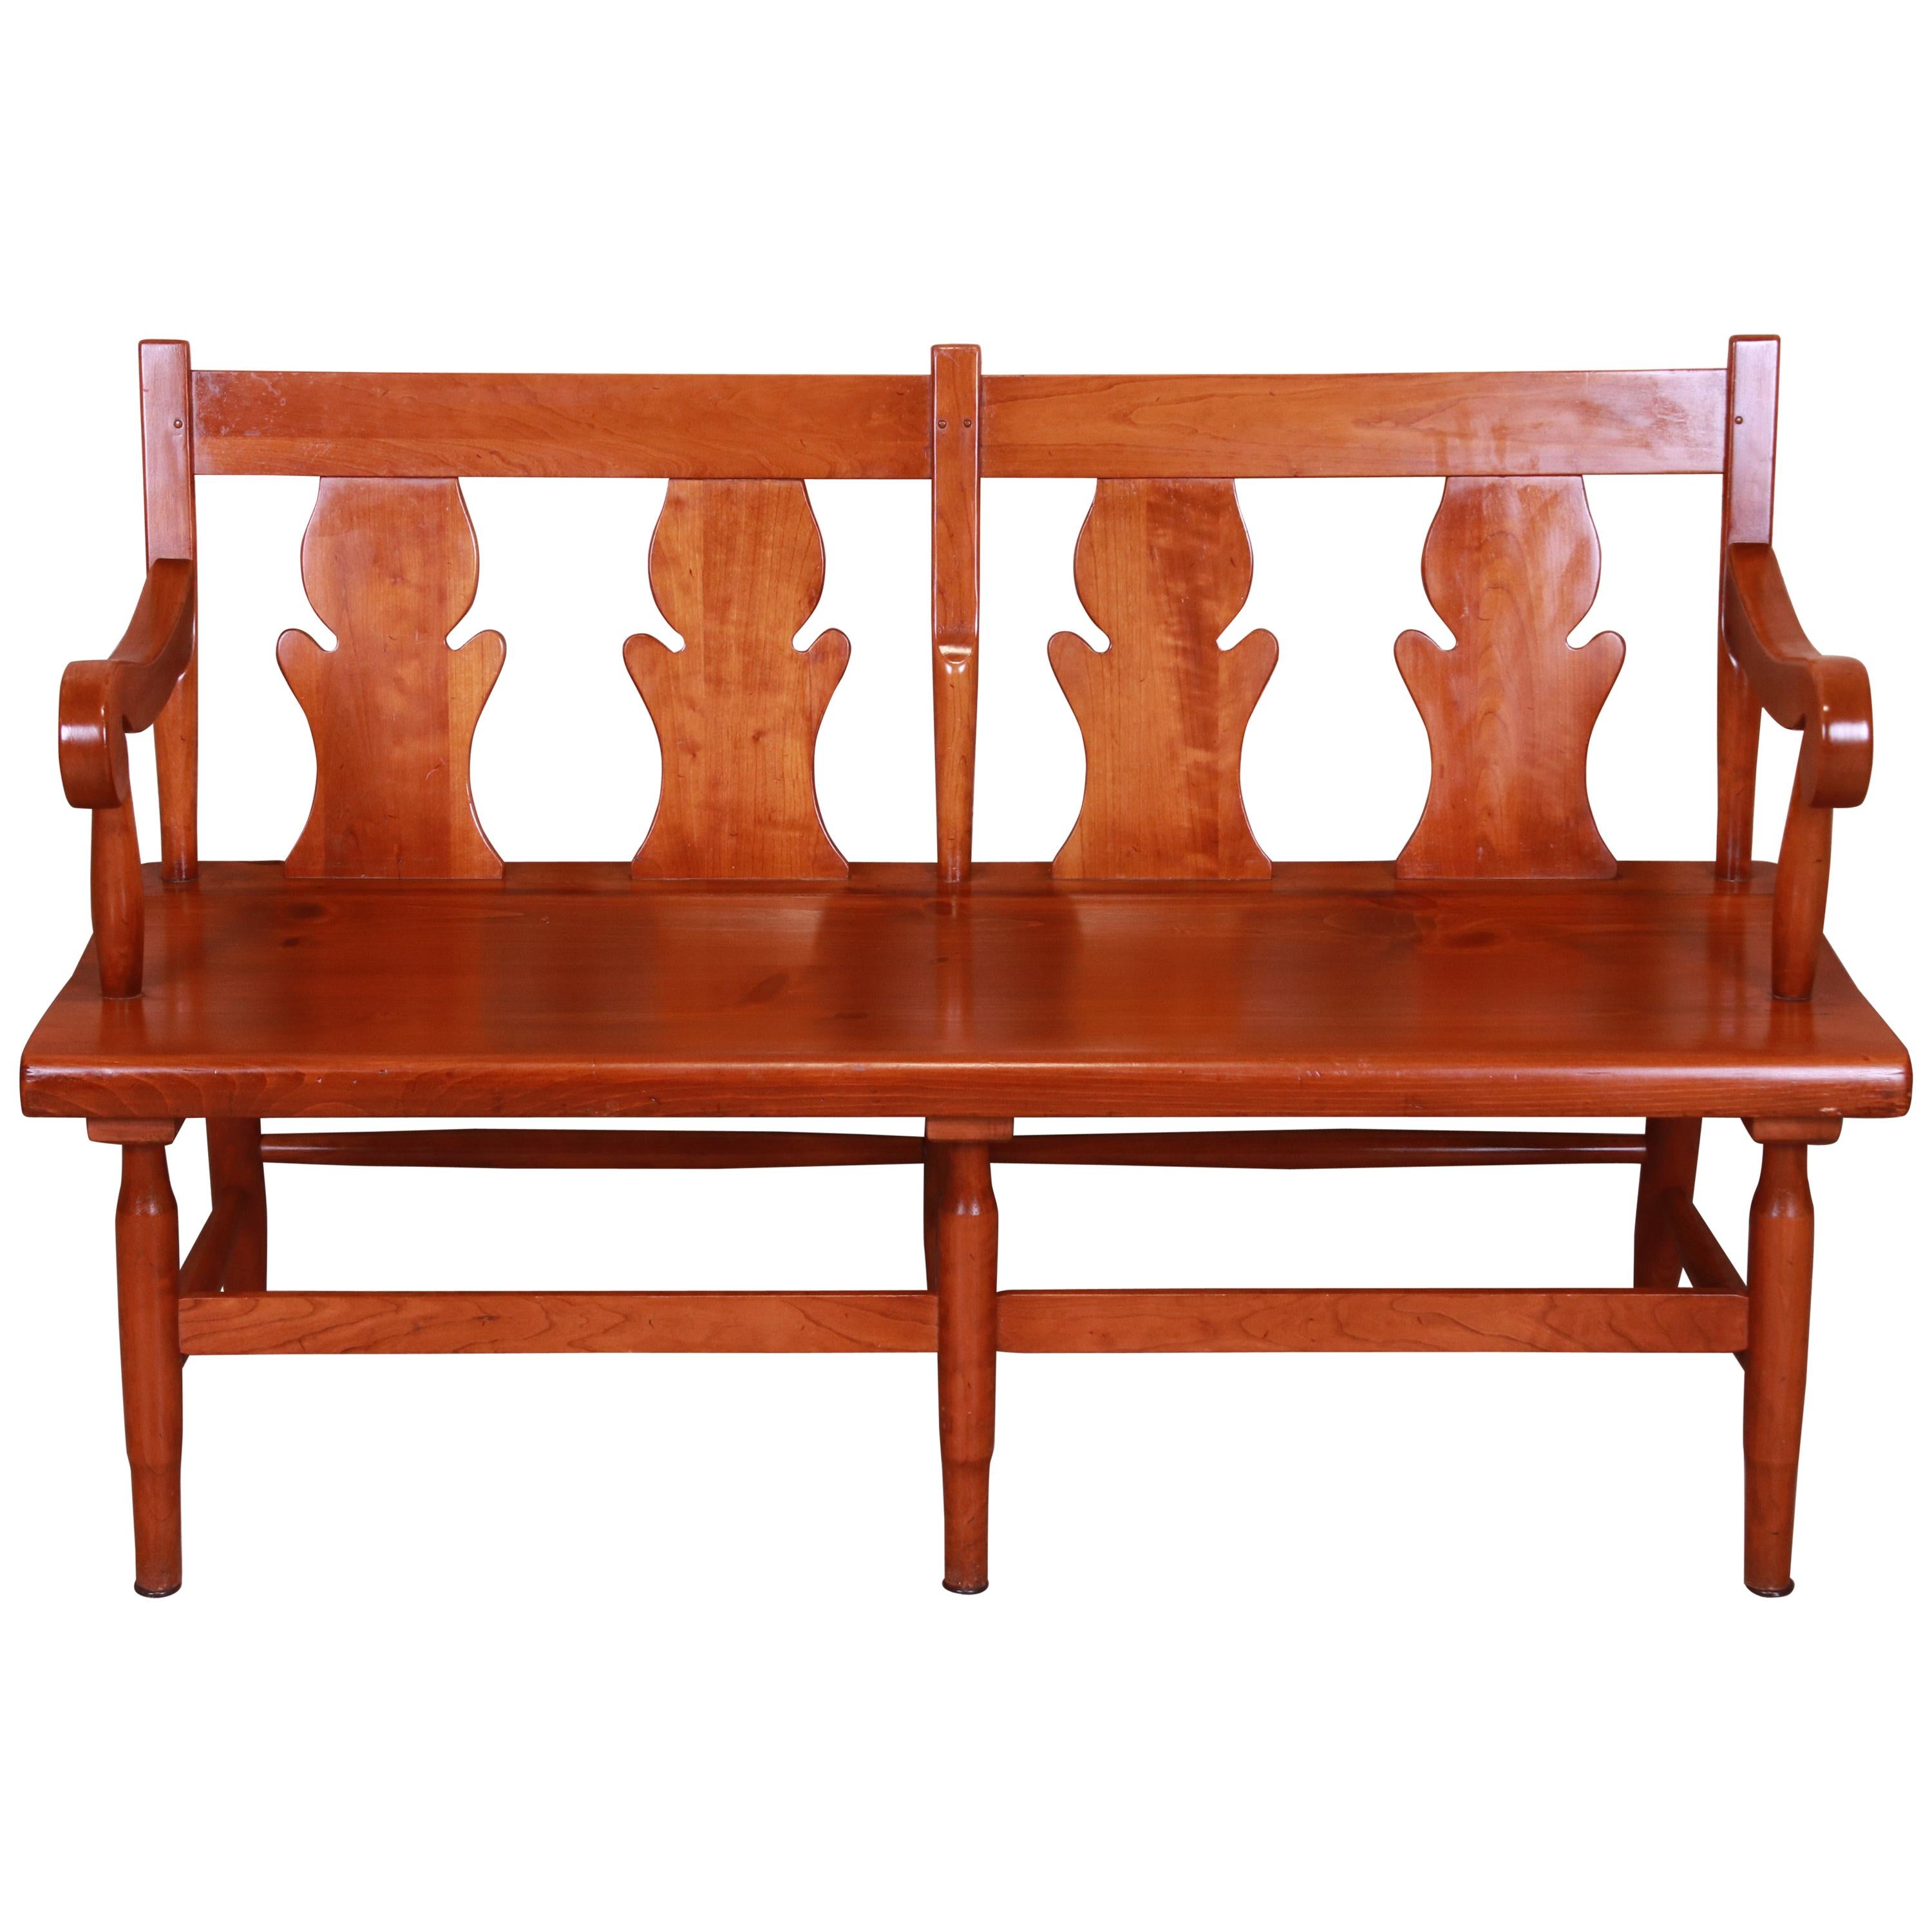 Stickley American Colonial Cherry Wood Fiddle Back Bench or Settee, Circa 1950s